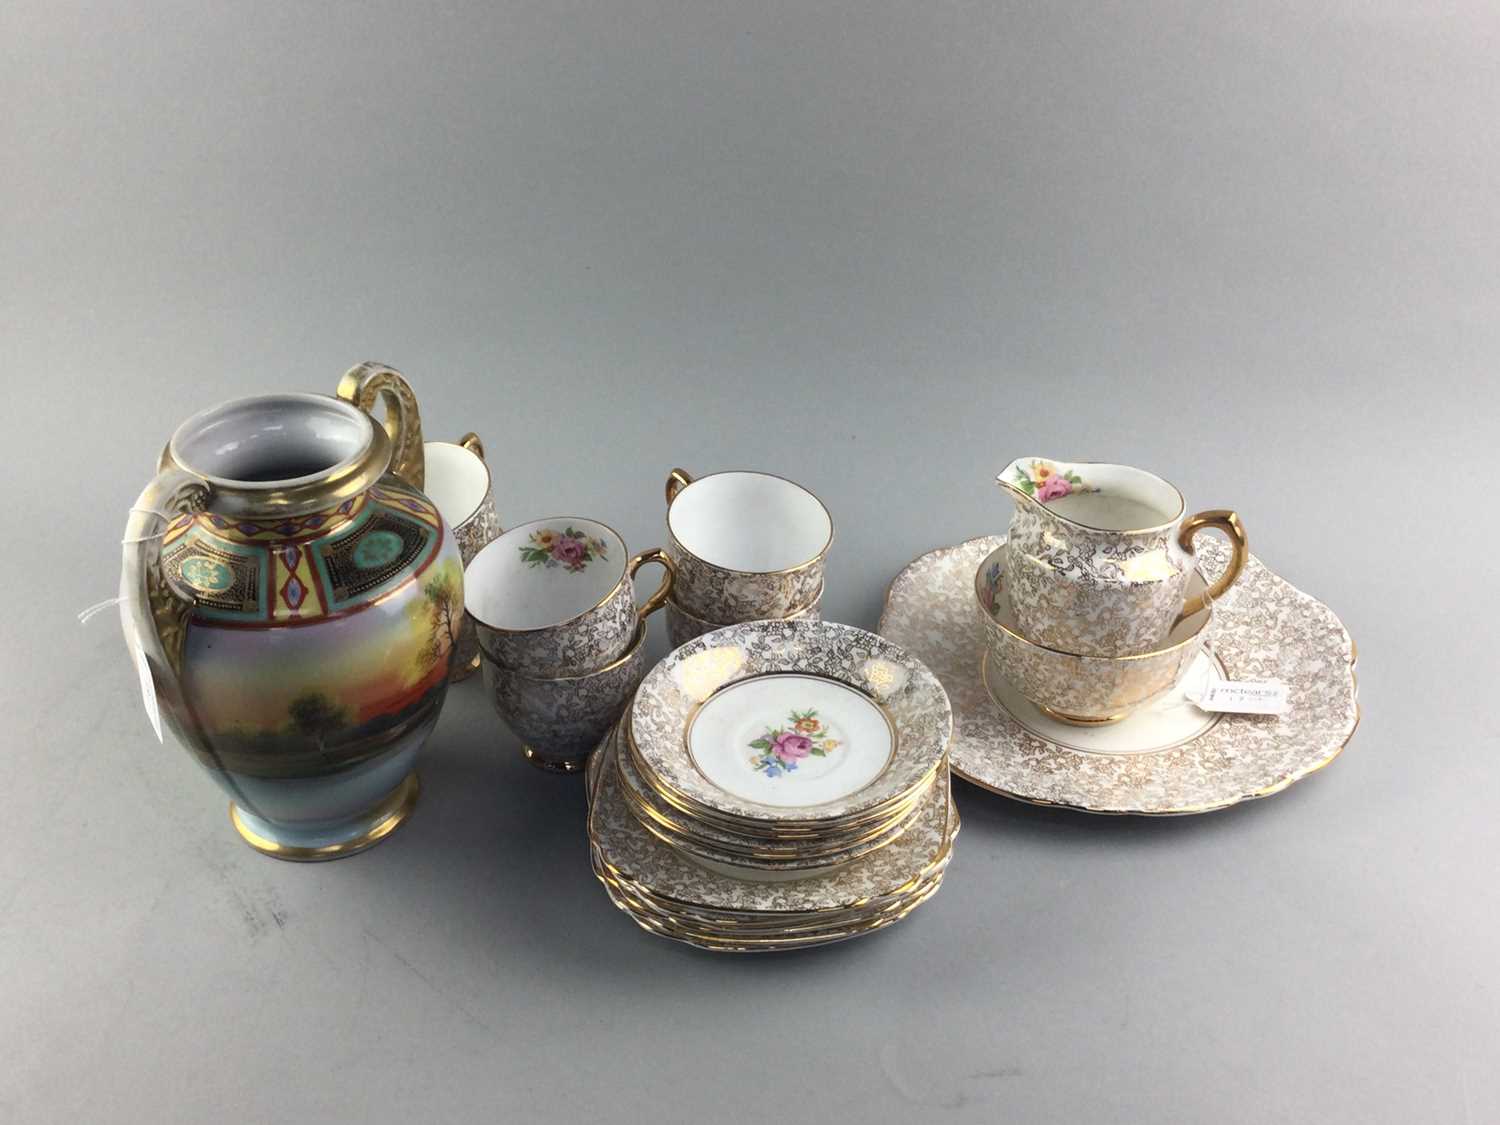 Lot 19 - A CAVOUR WARE STAFFORDSHIRE PART TEA SERVICE ALONG WITH A NORITAKE VASE